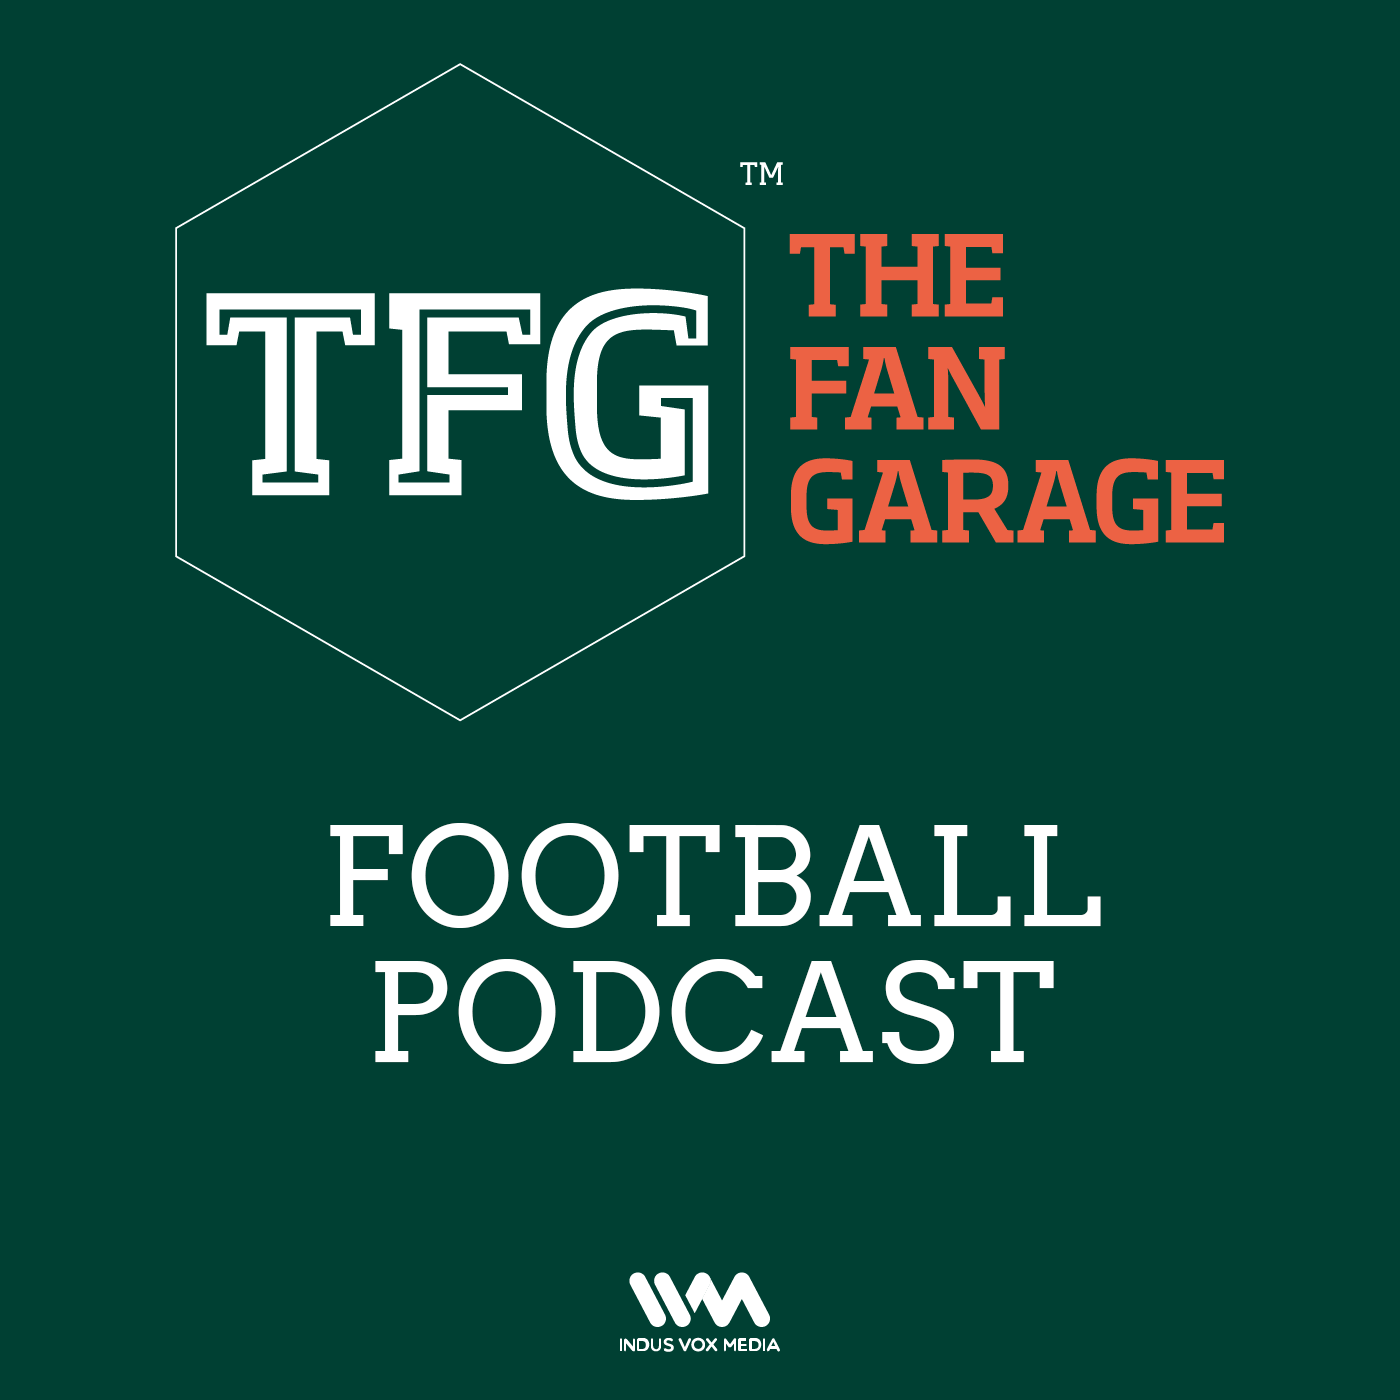 TFG Indian Football Ep. 311: The Good, The Bad and The Ugly